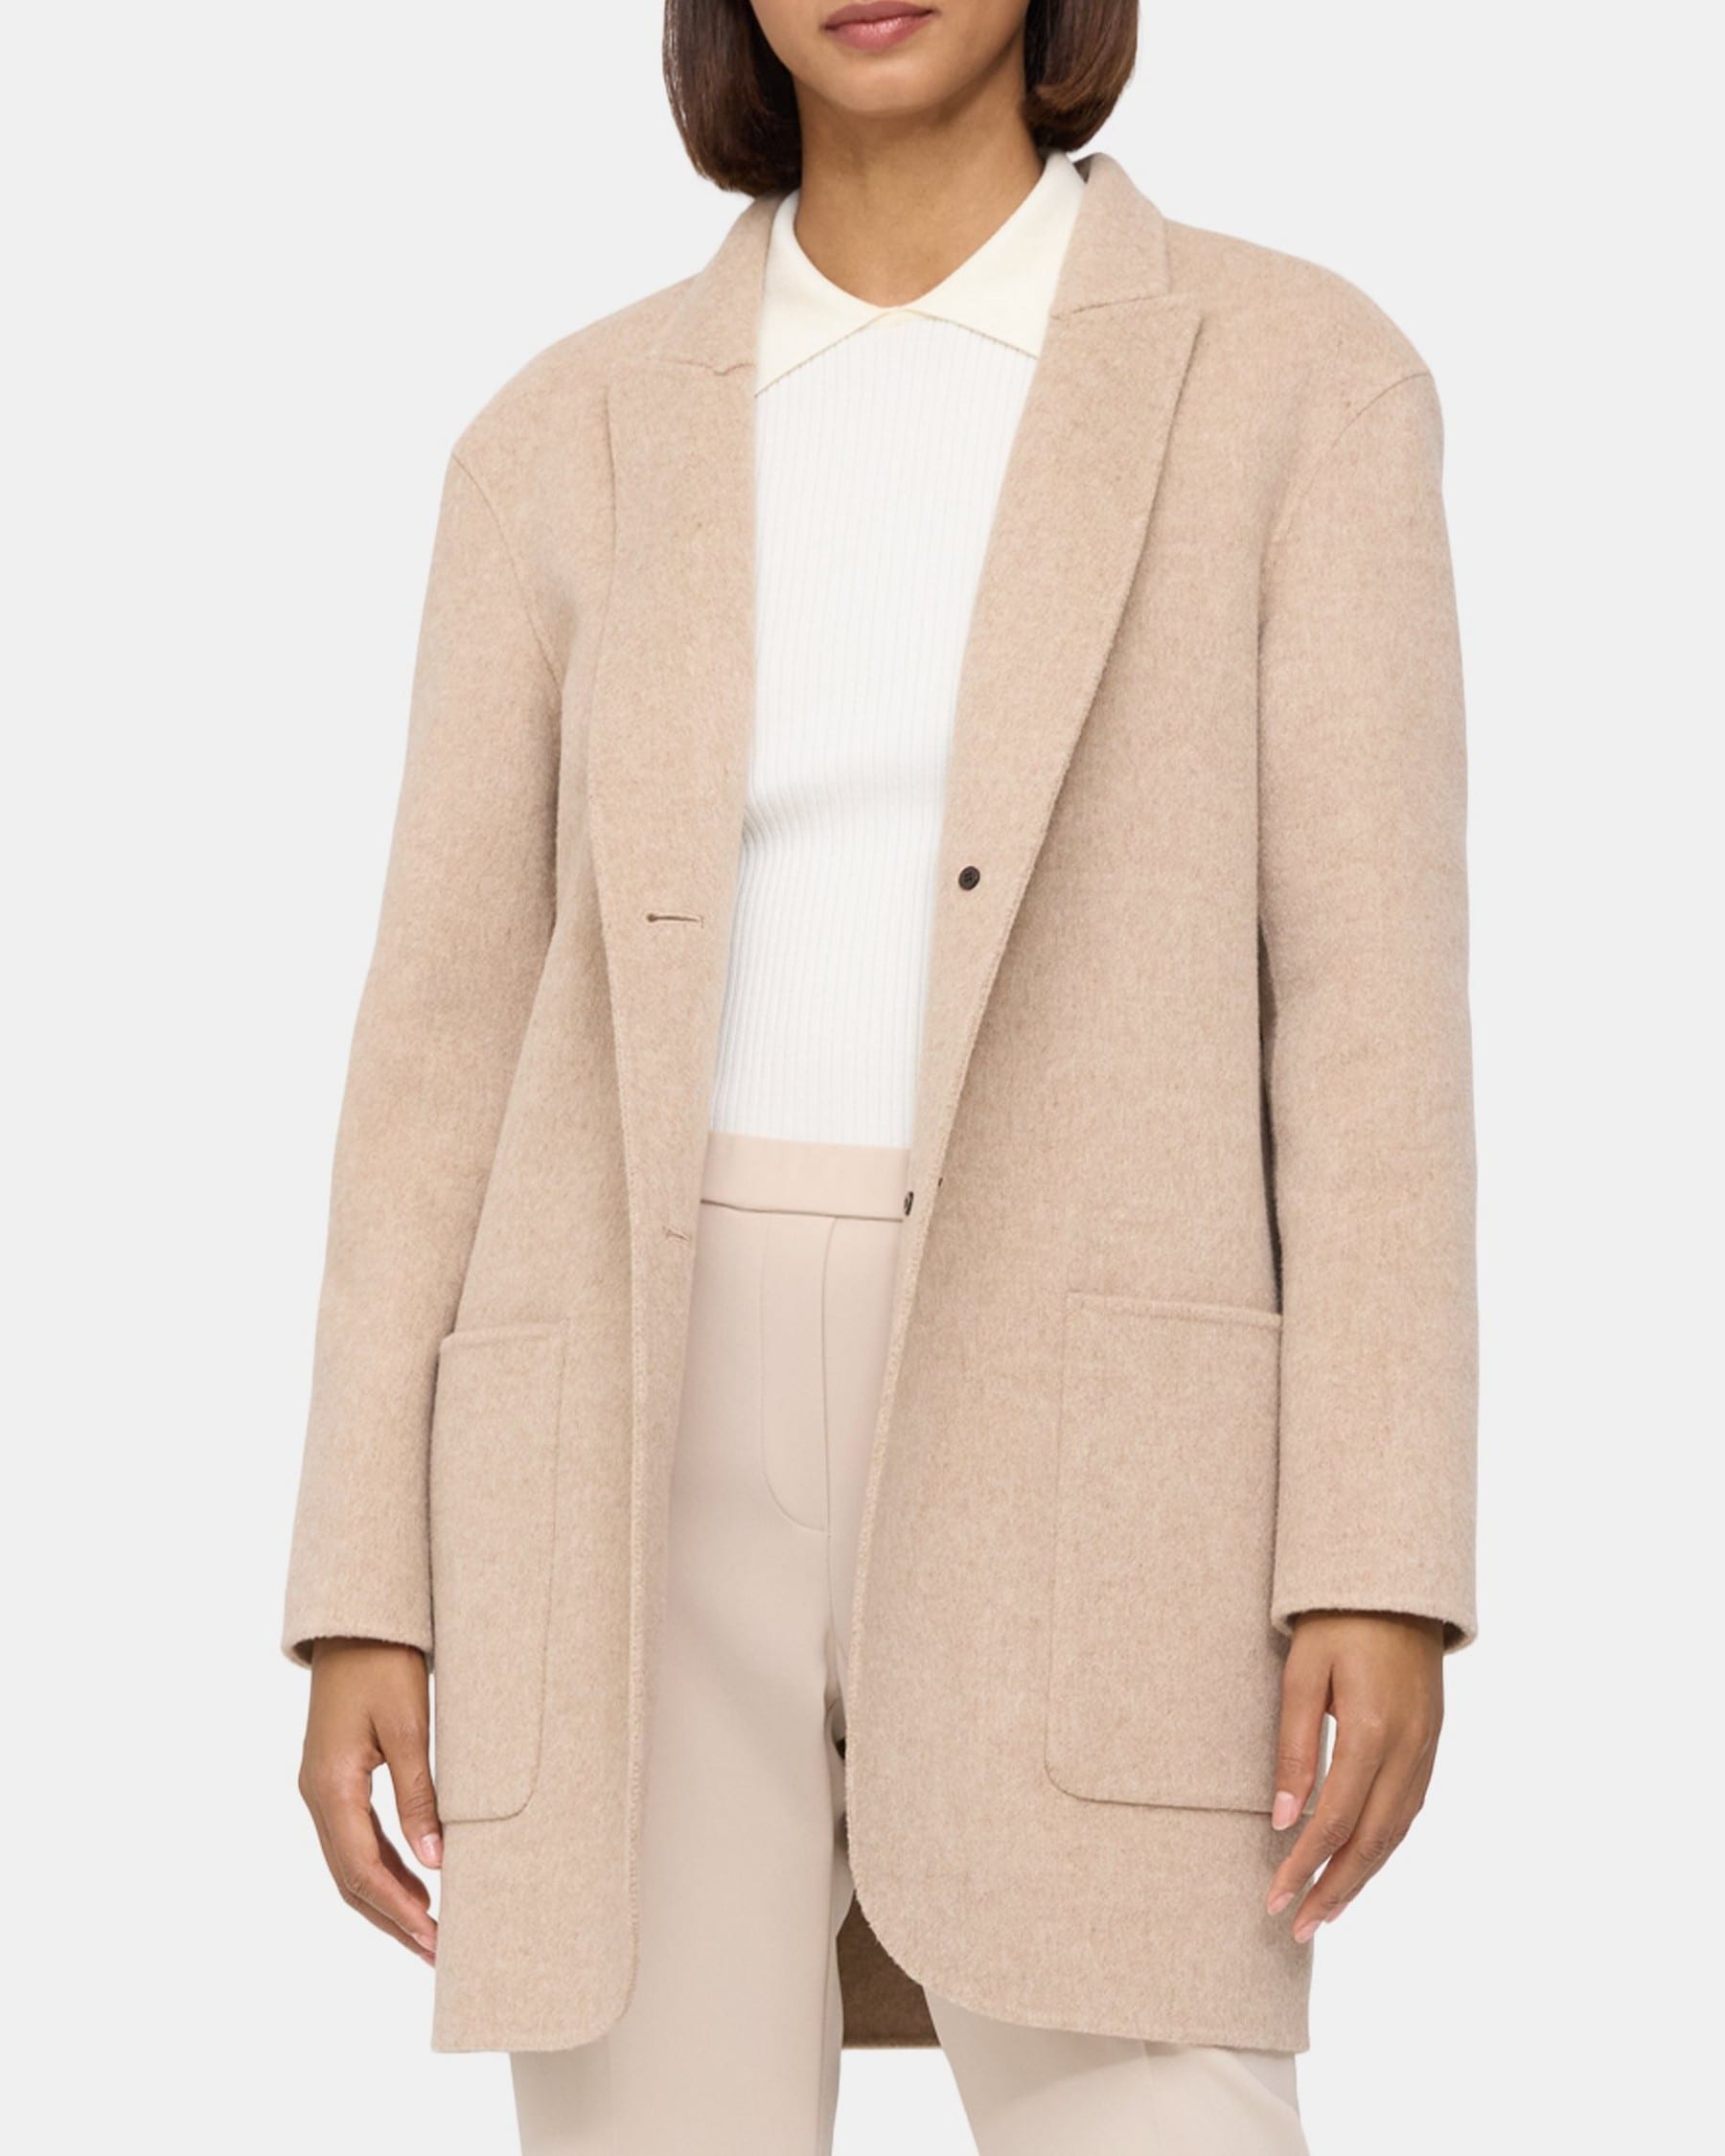 Stand Collar Coat in Double-Face Wool-Cashmere